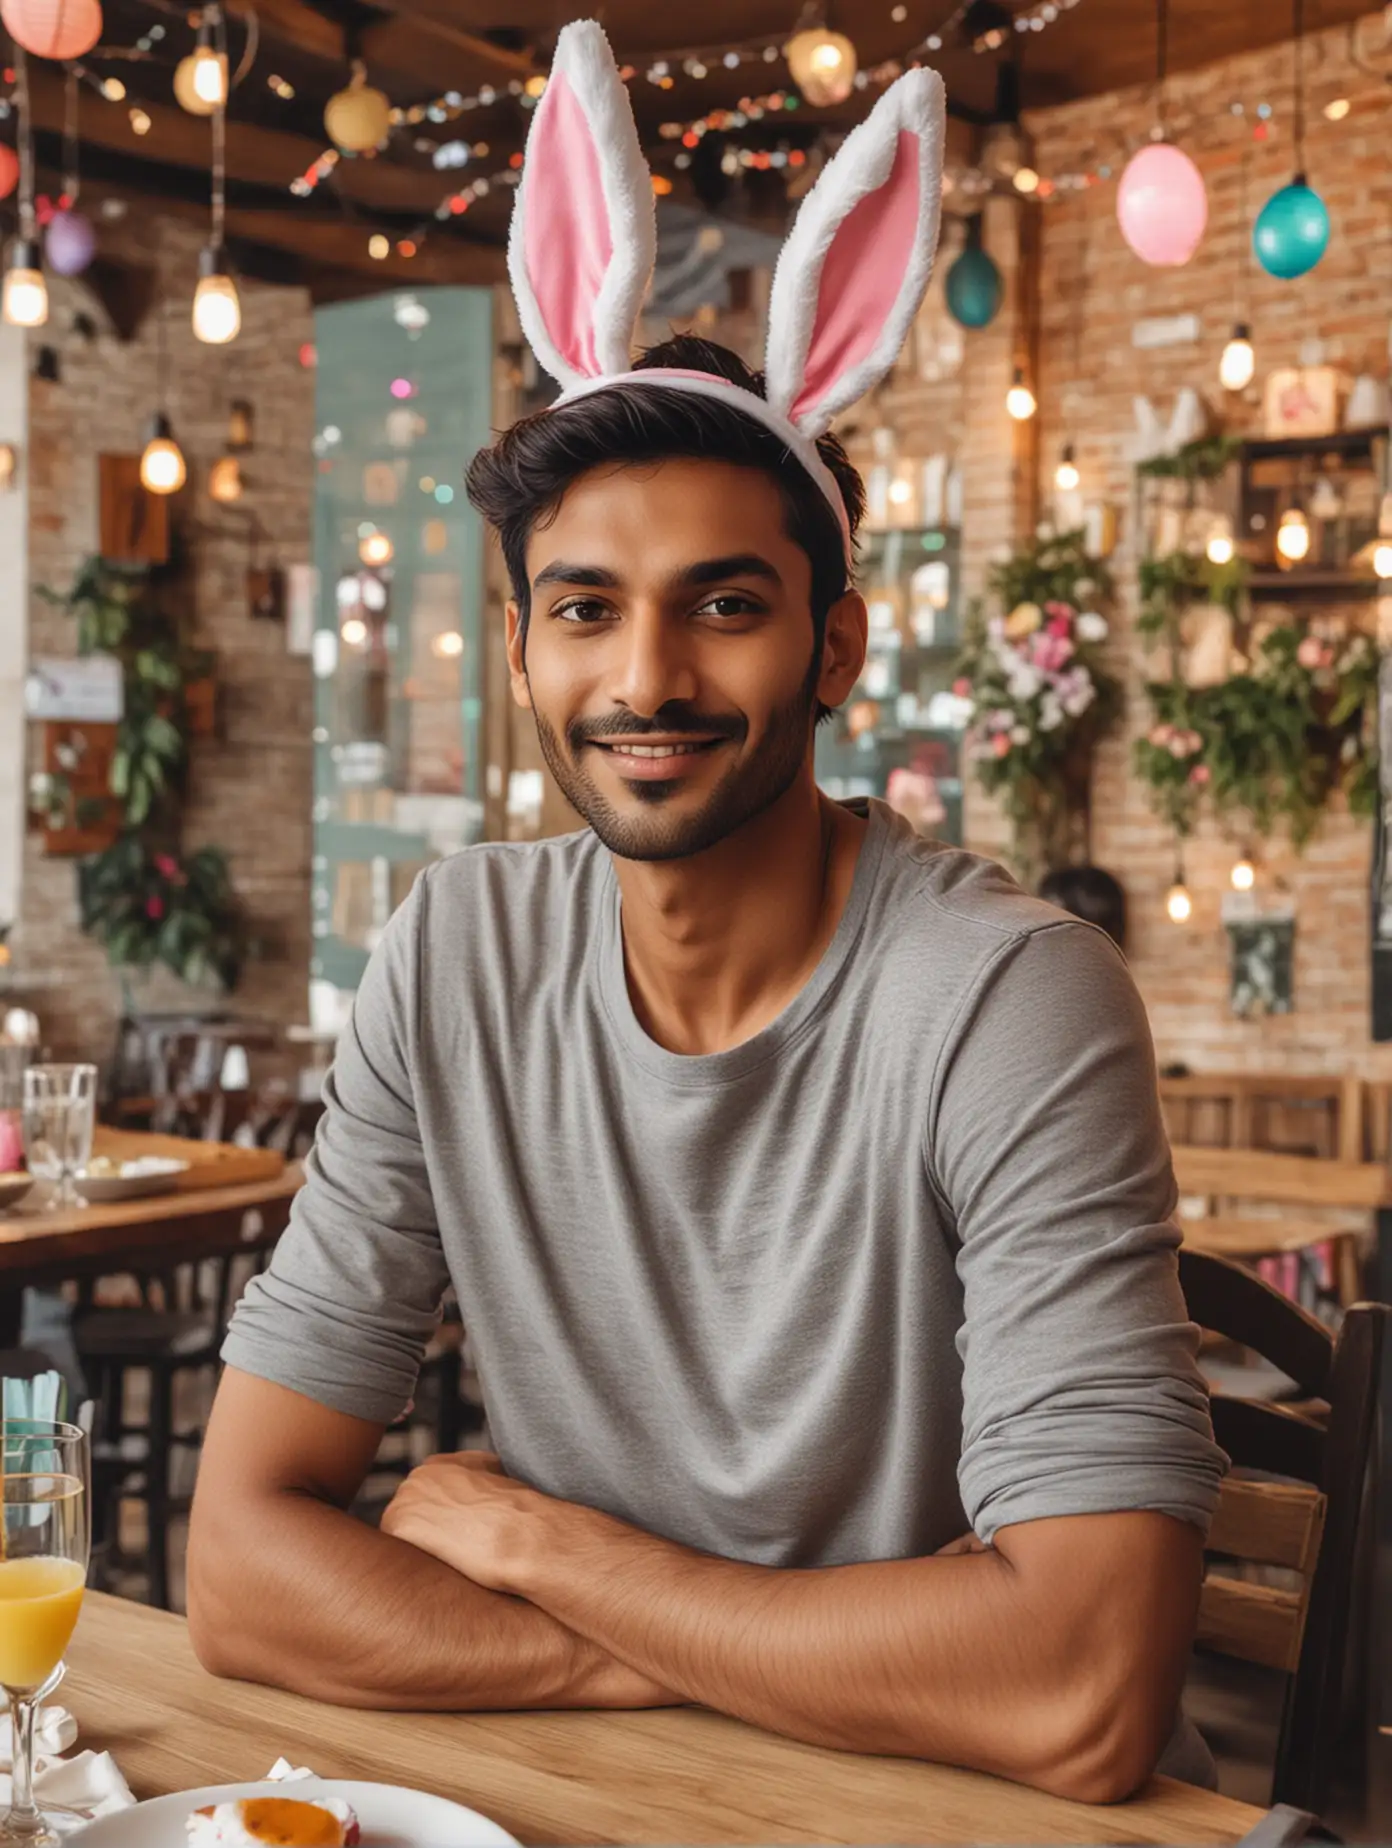 Handsome Indian Man Celebrating Easter in Bunny Ears at Cozy Restaurant